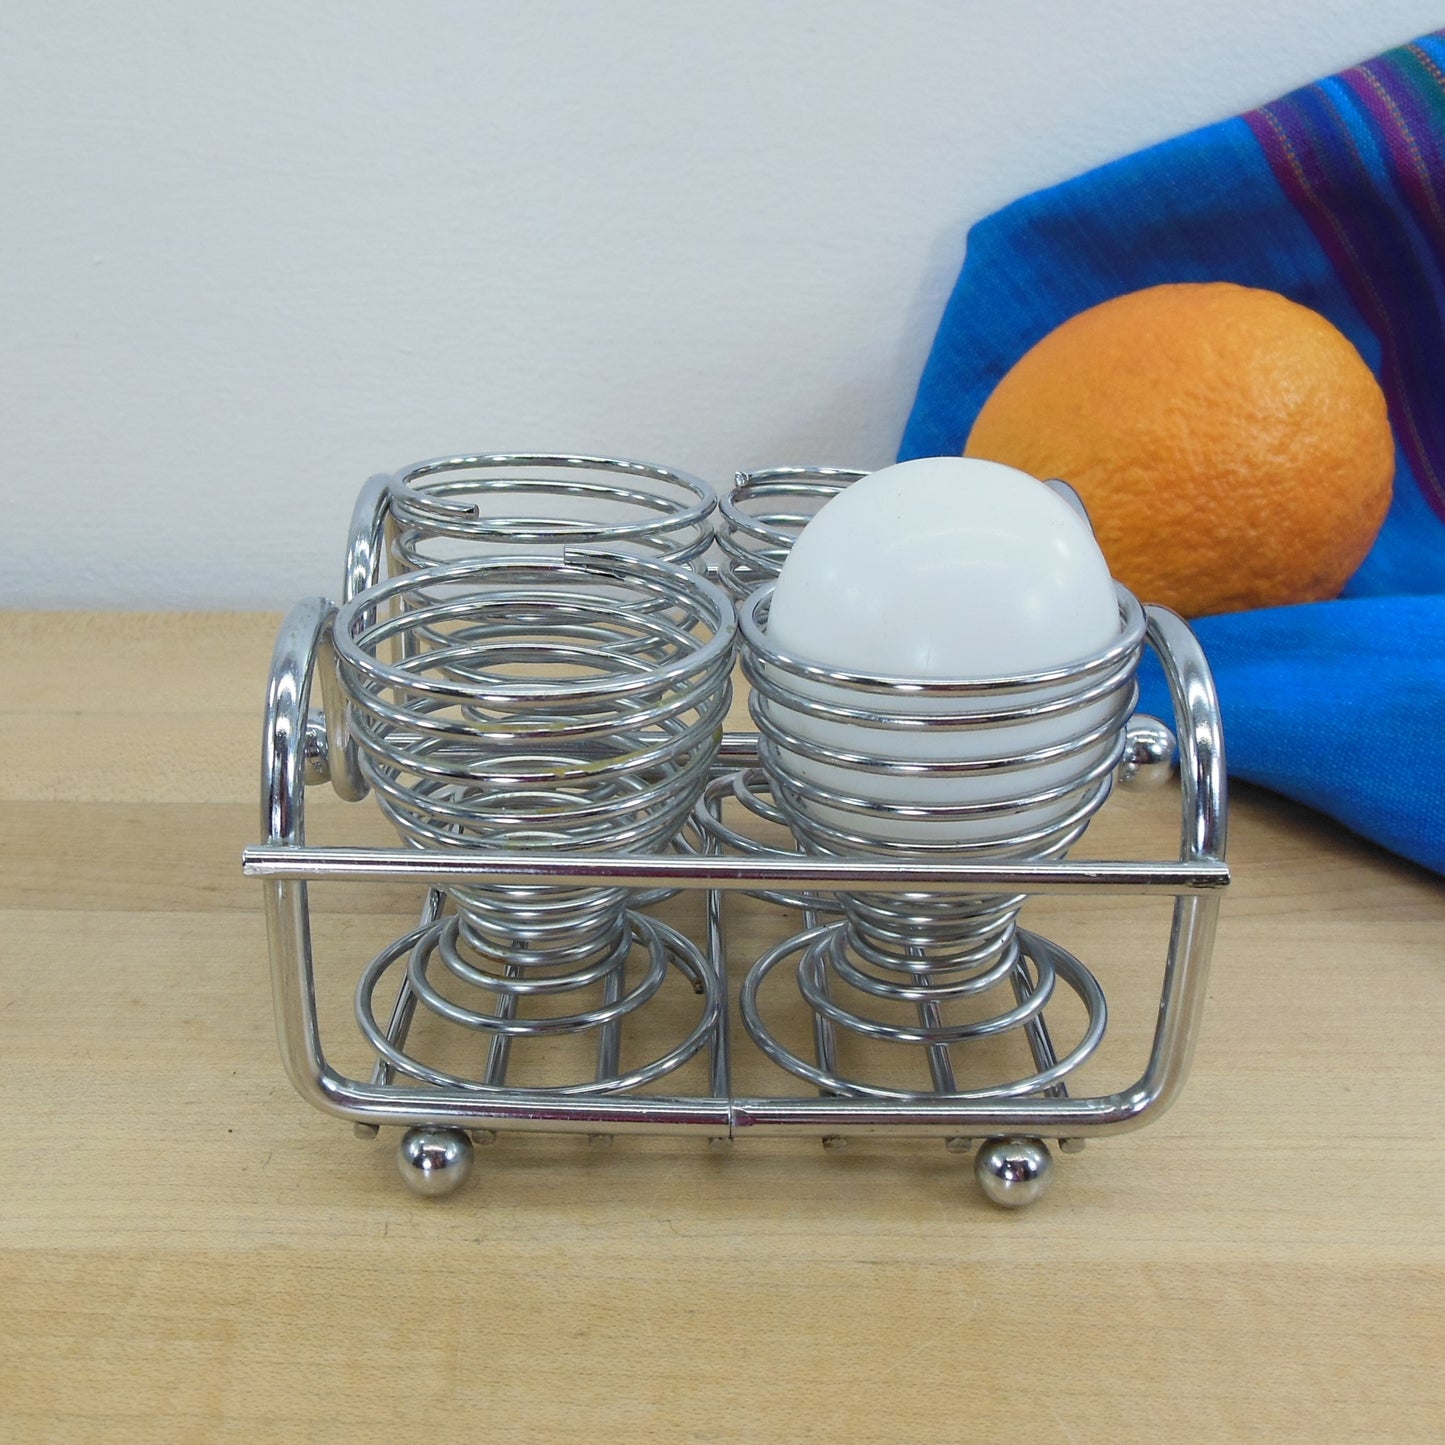 Soft Boil Egg Coil Spring Chrome Stainless Cups - 4 Set With Caddy